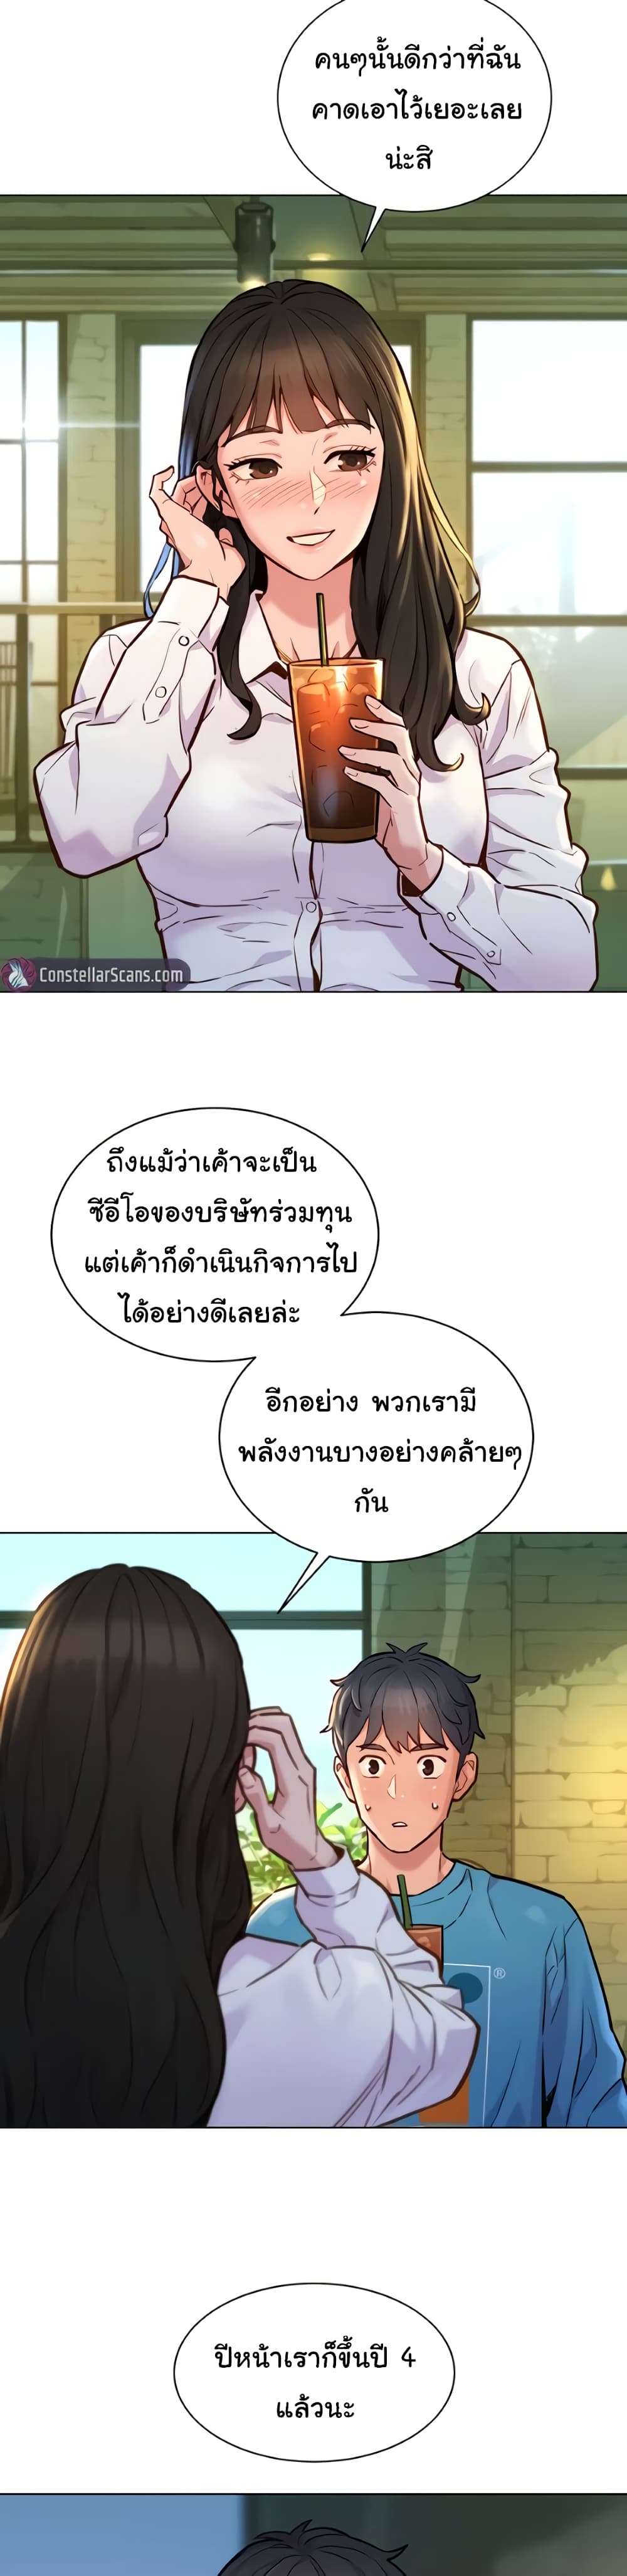 Let’s Hang Out from Today ตอนที่ 1 ภาพ 3